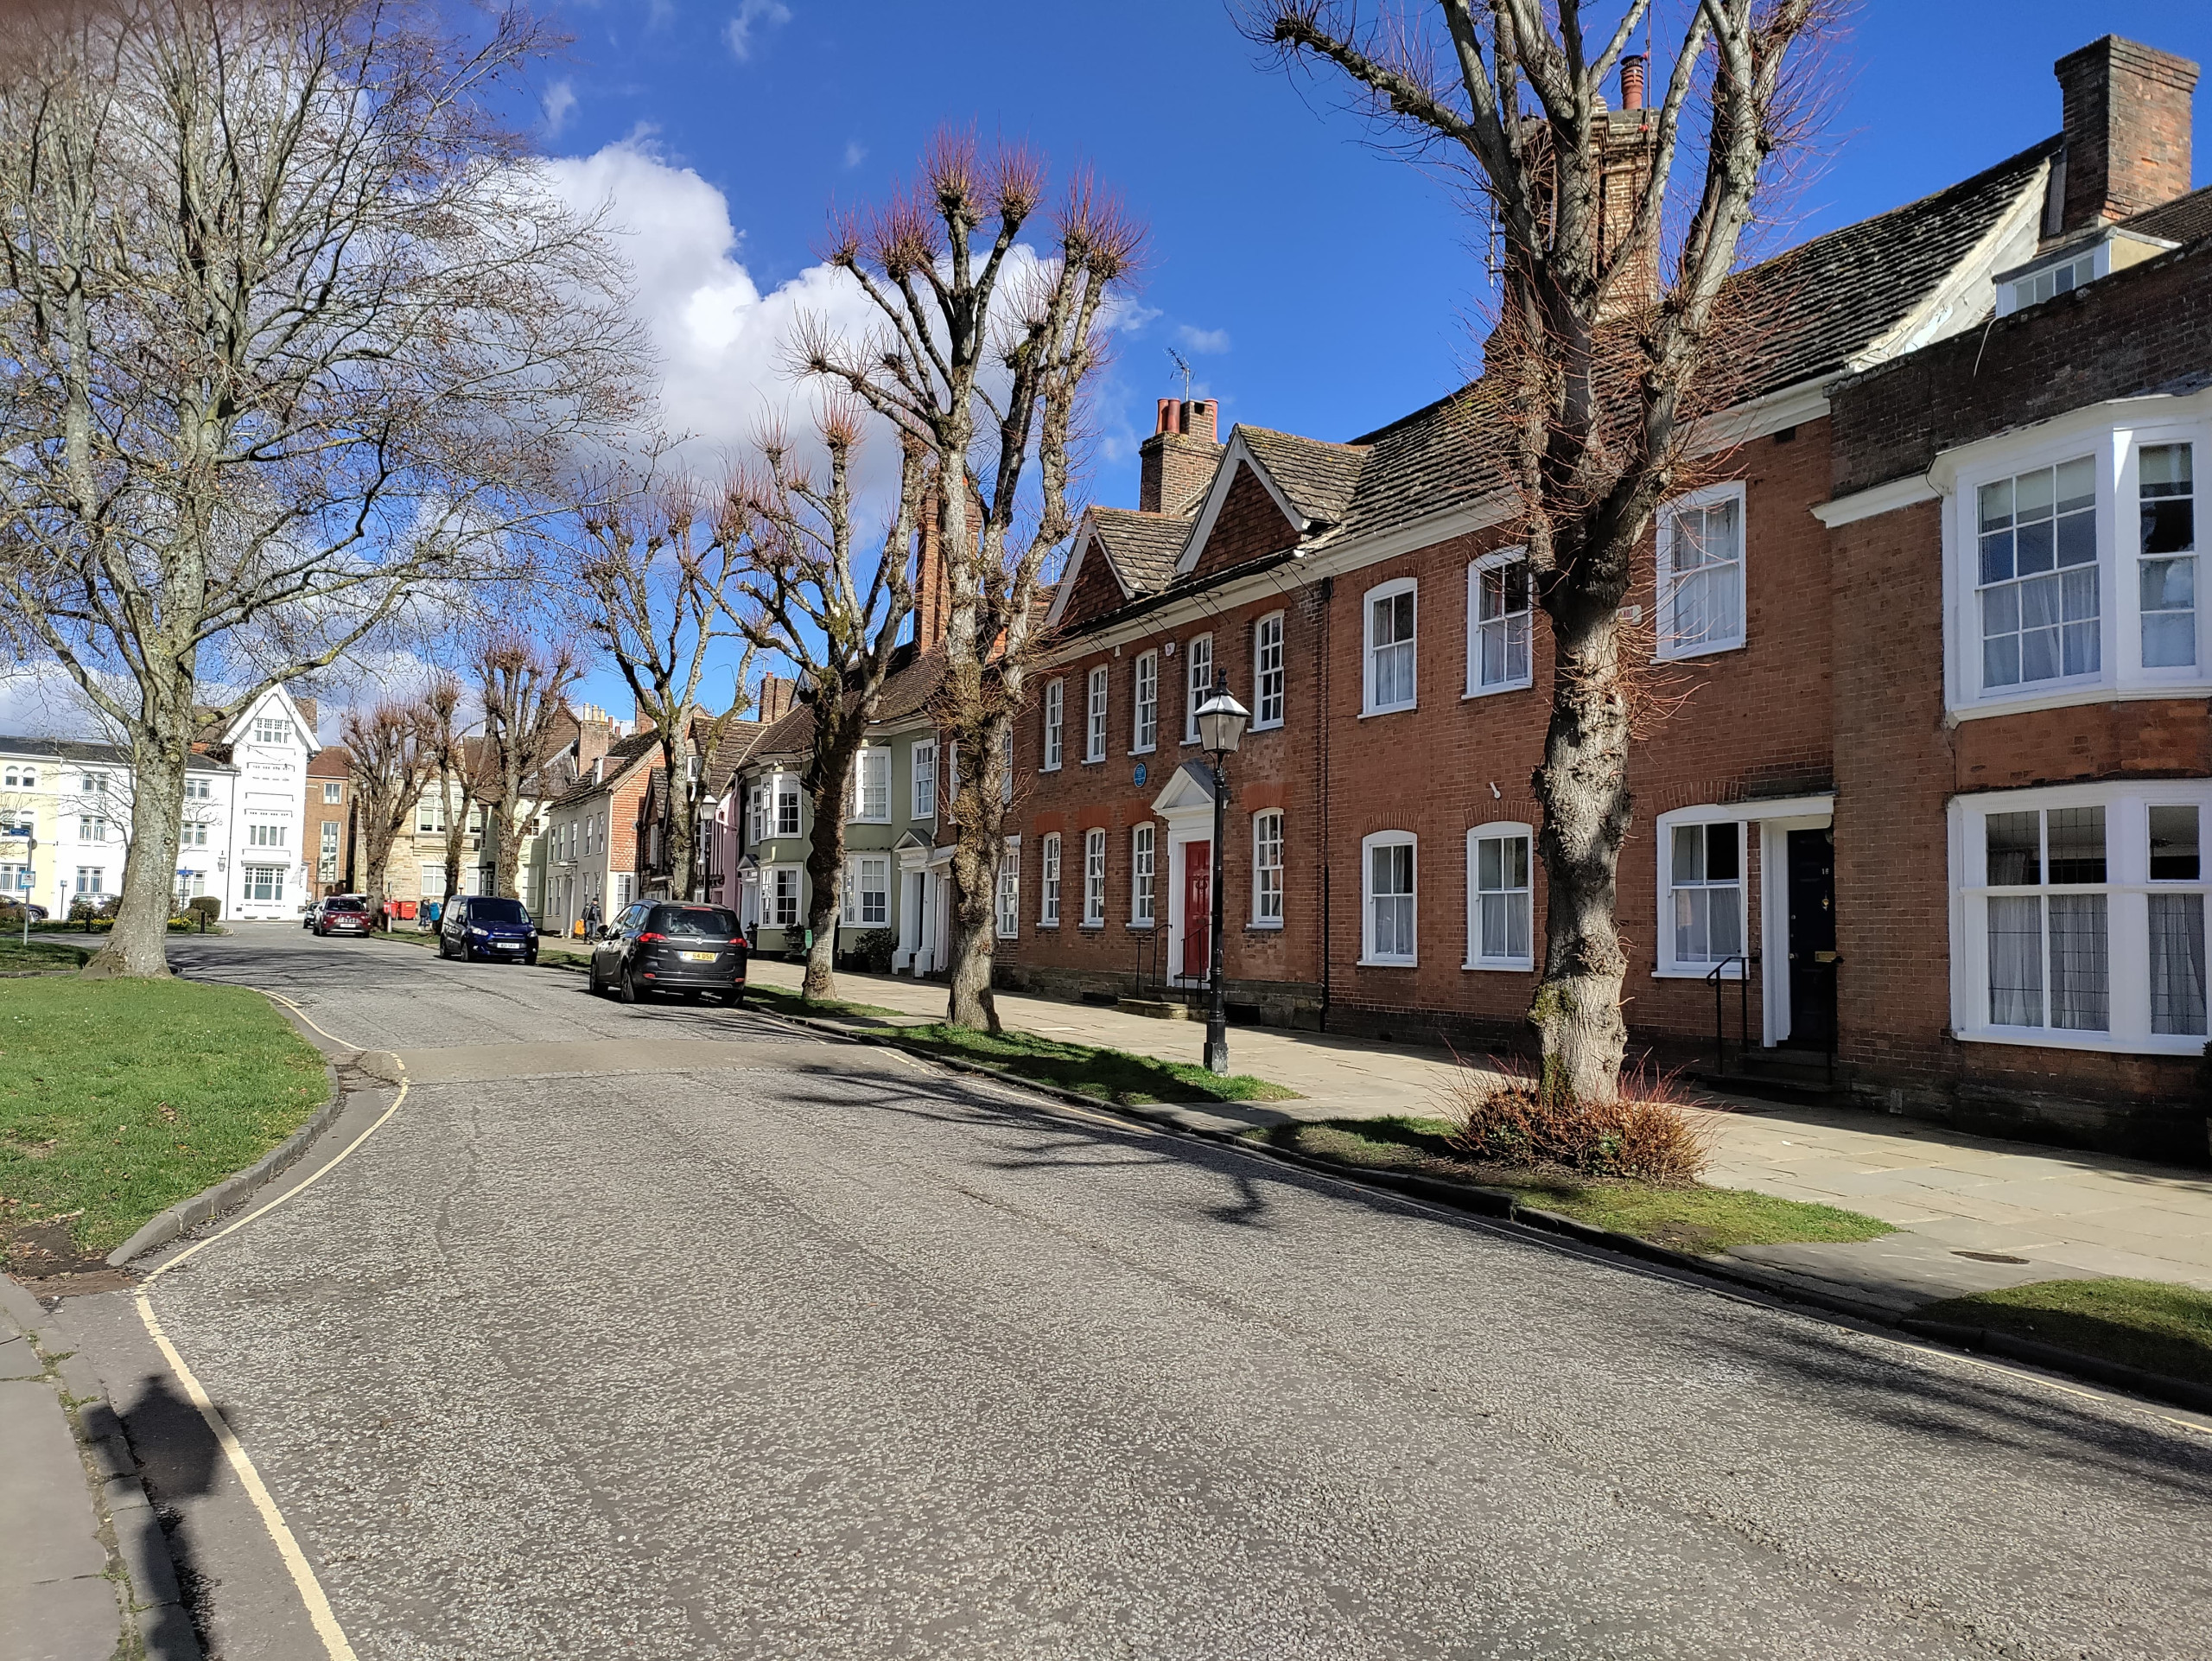 A tree-lined street of old houses in Horsham